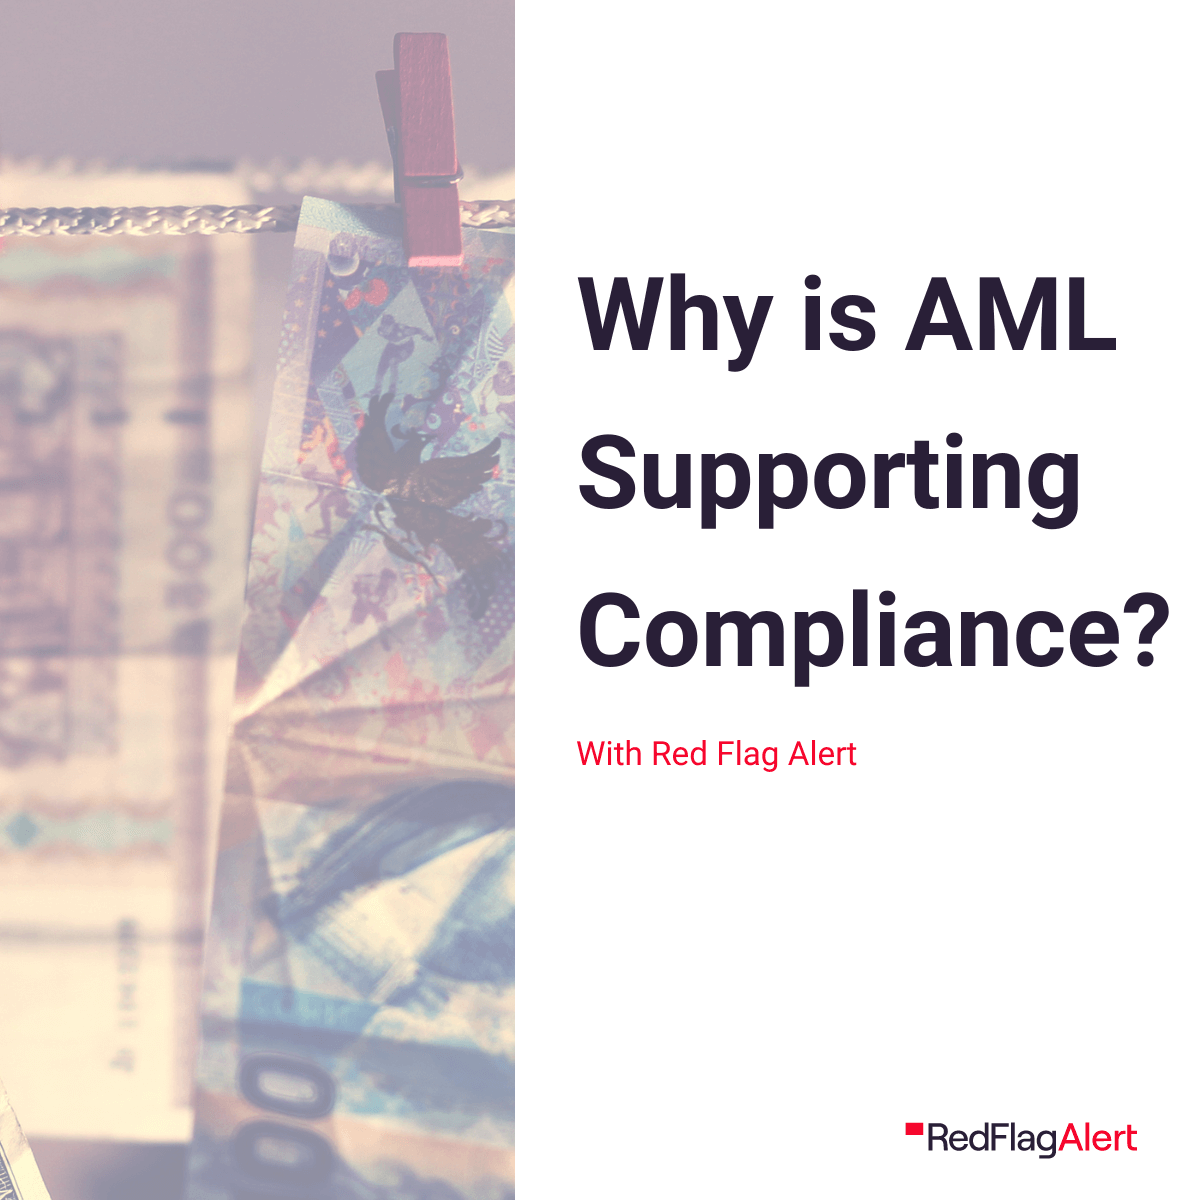 Why is AML Supporting Compliance?